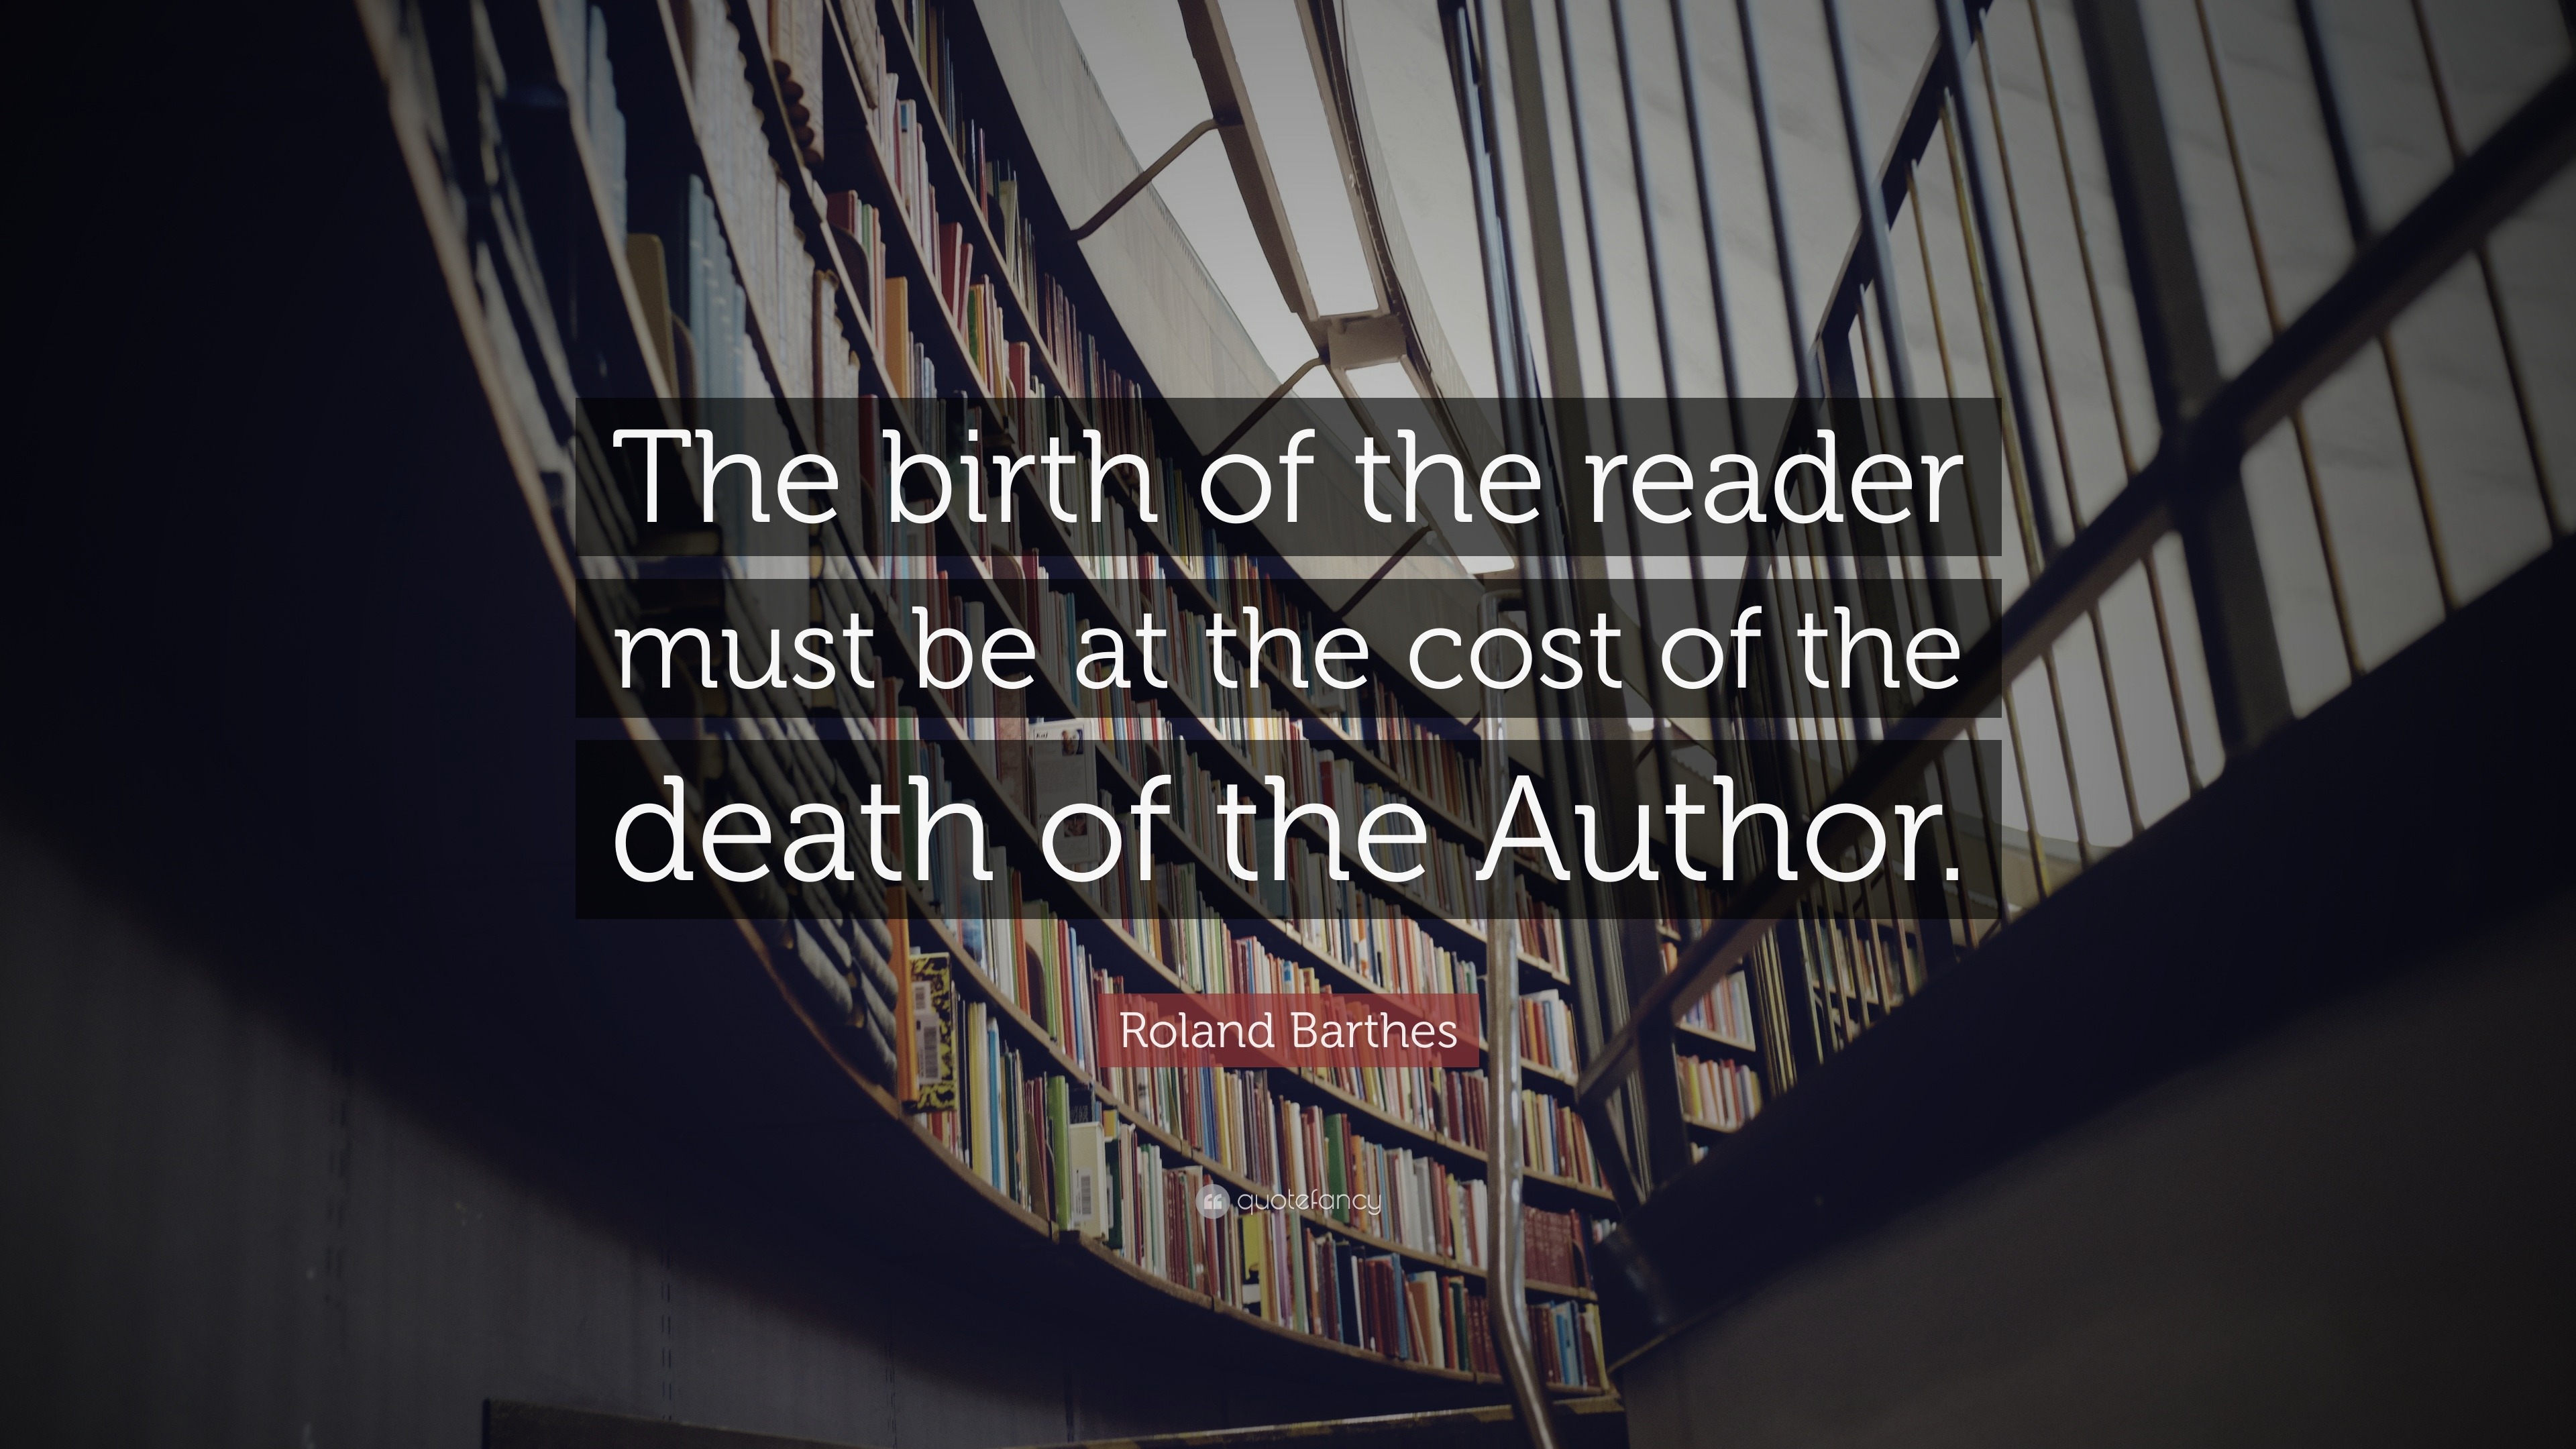 Roland Barthes Quote: “The Birth Of The Reader Must Be At The Cost Of The Death